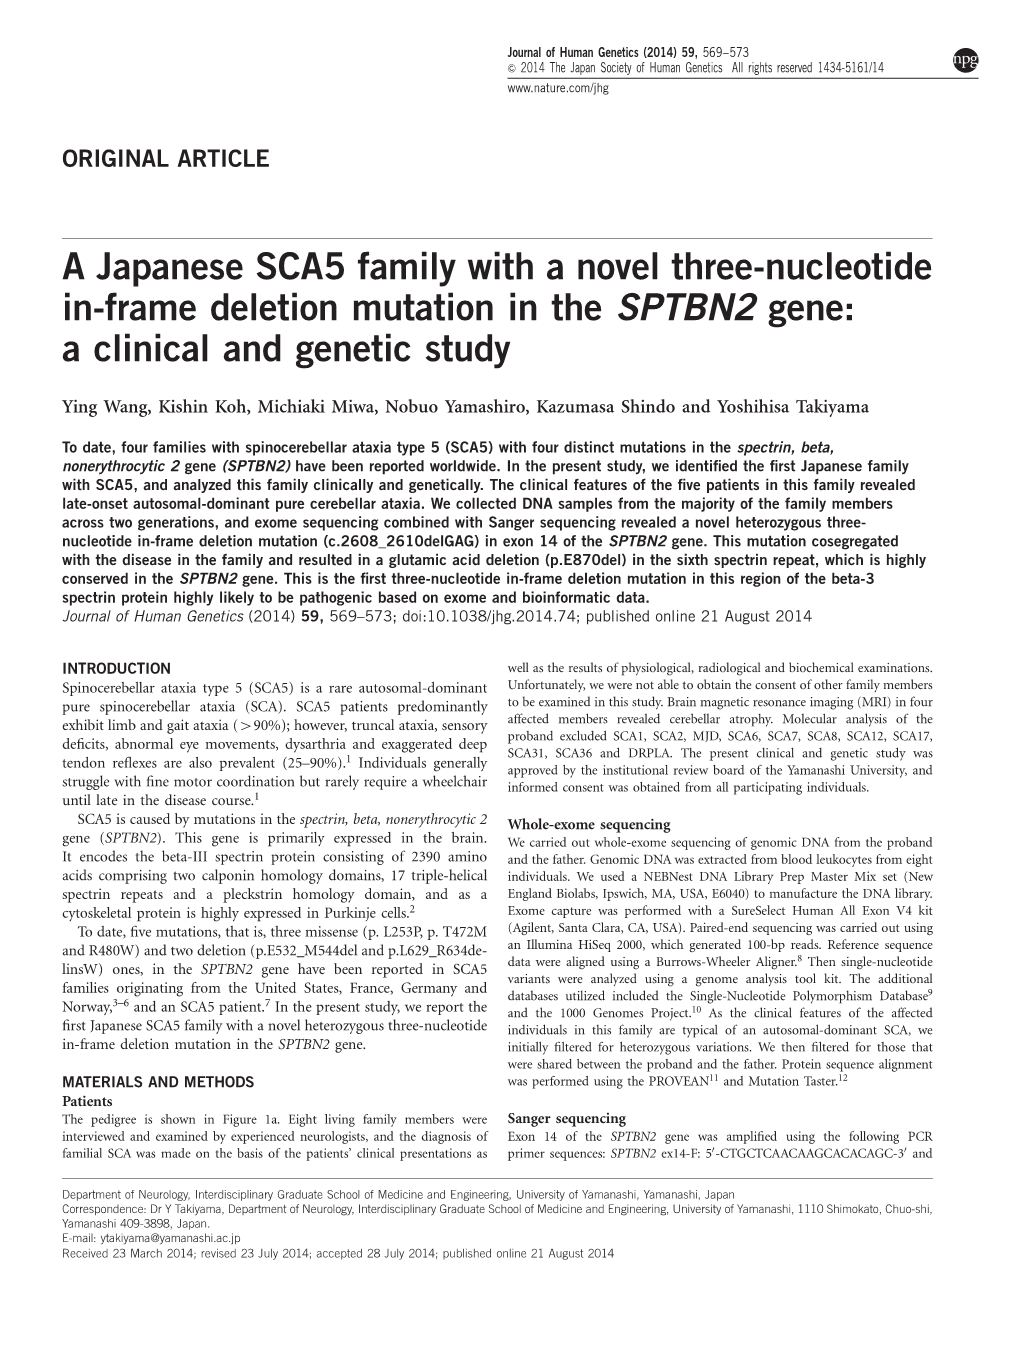 A Japanese SCA5 Family with a Novel Three-Nucleotide In-Frame Deletion Mutation in the SPTBN2 Gene: a Clinical and Genetic Study